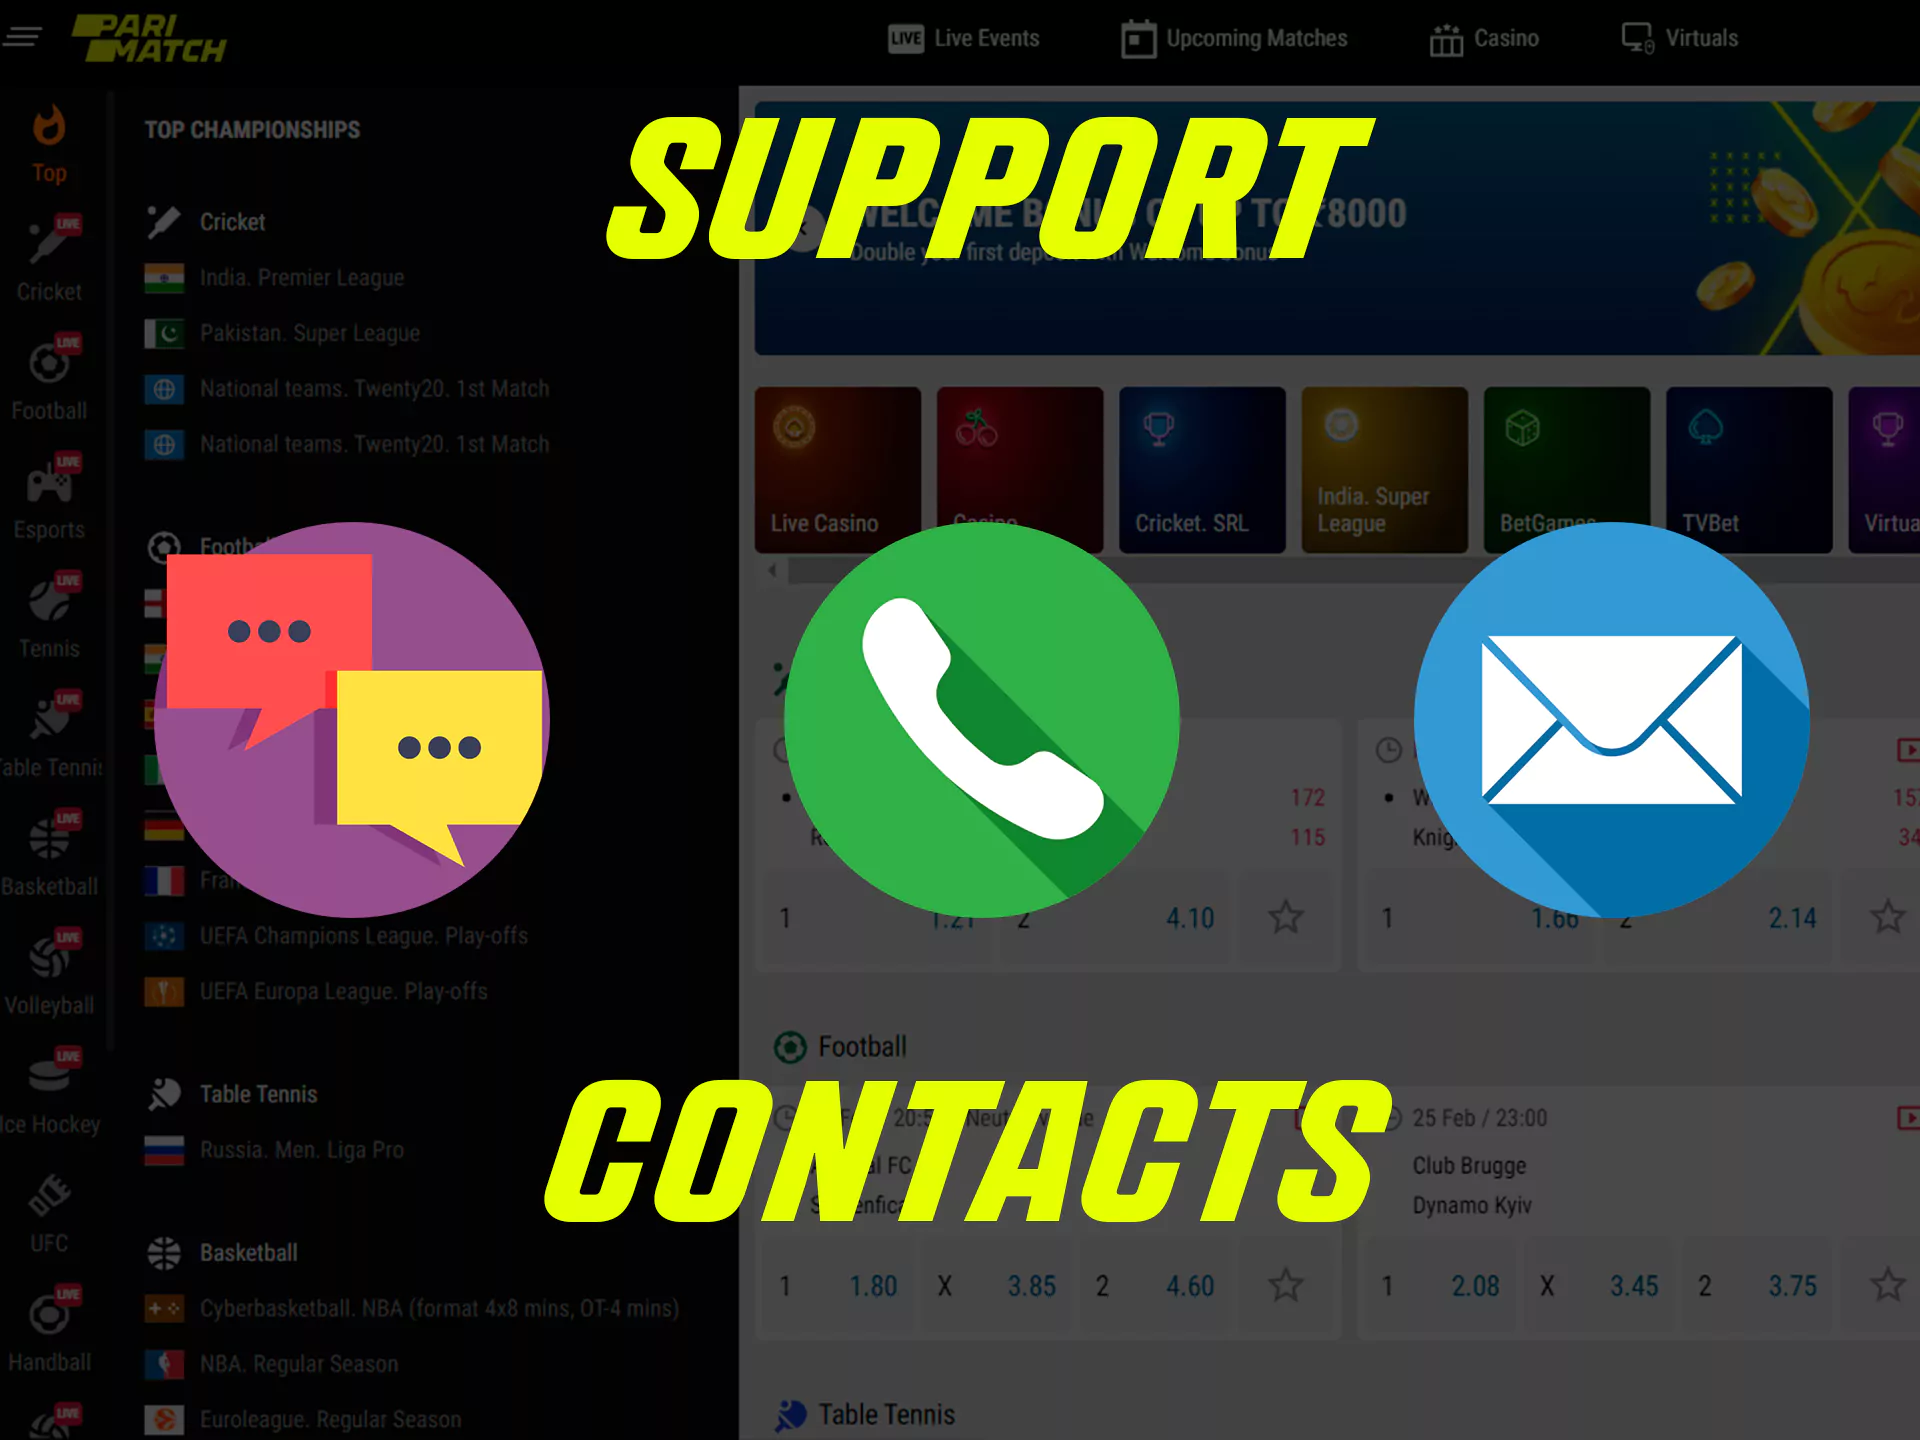 Here are all the ways you can contact support through the app.